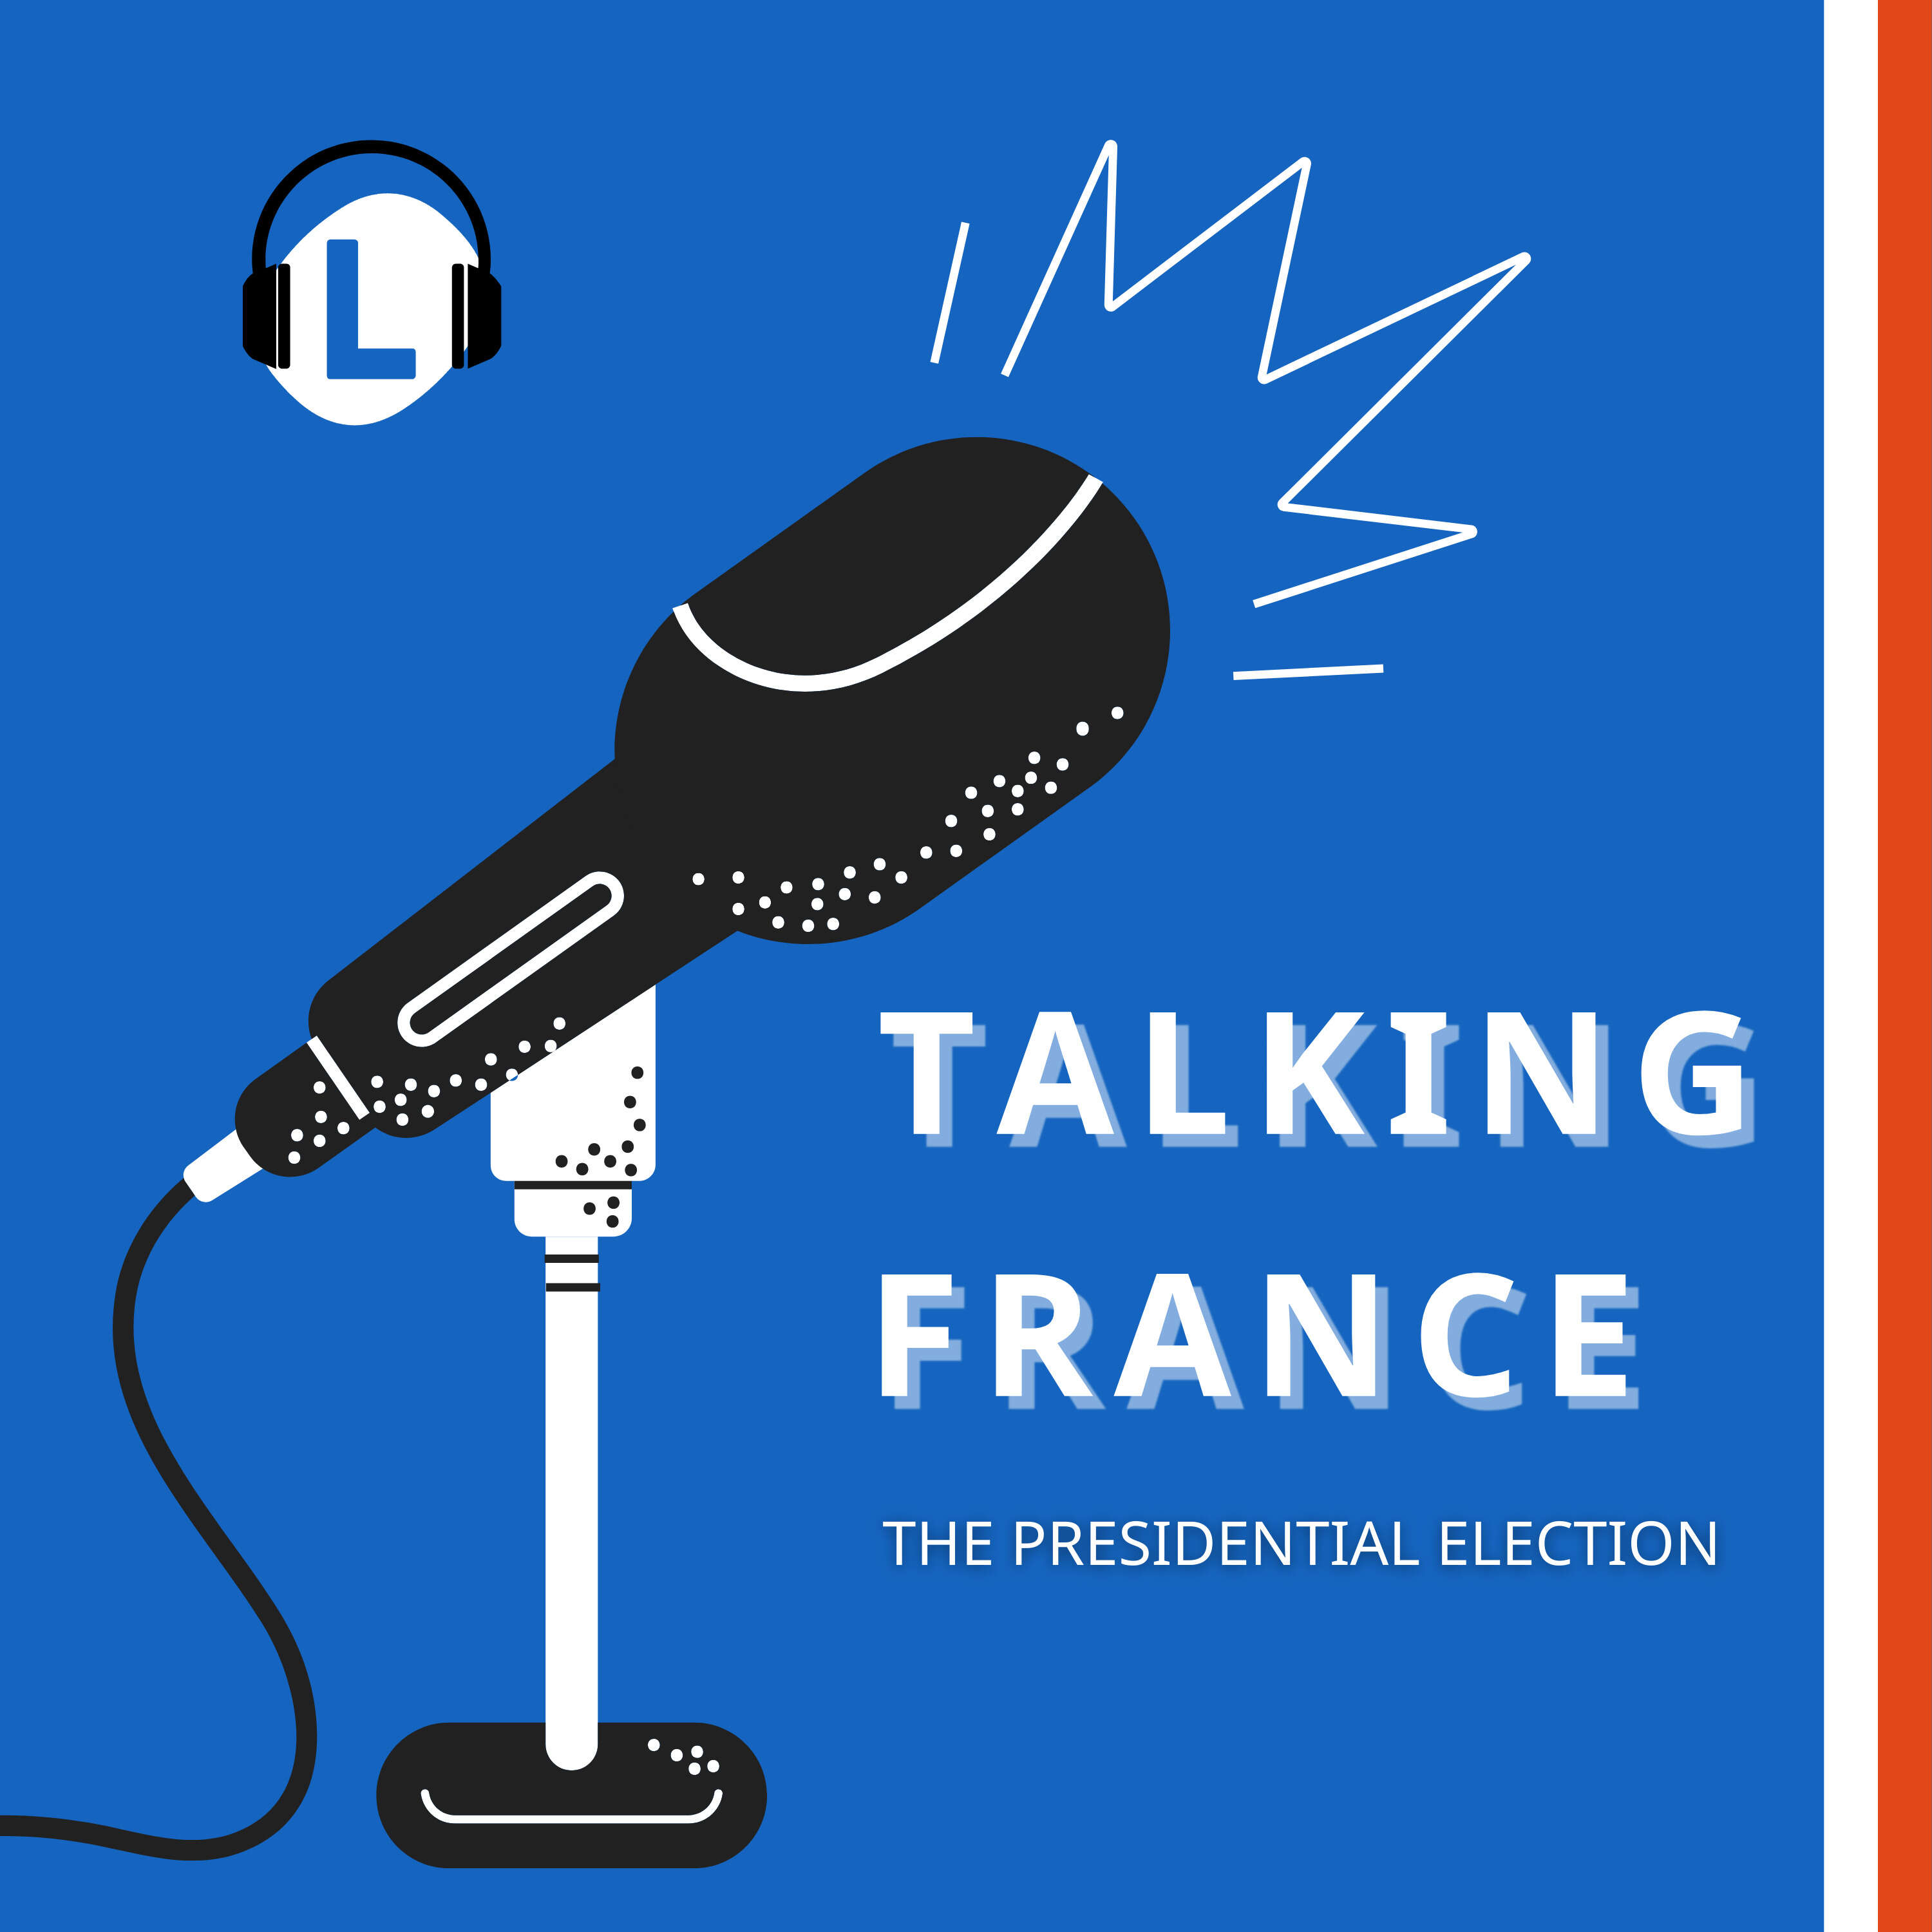 What's next for France after Macron wins re-election?